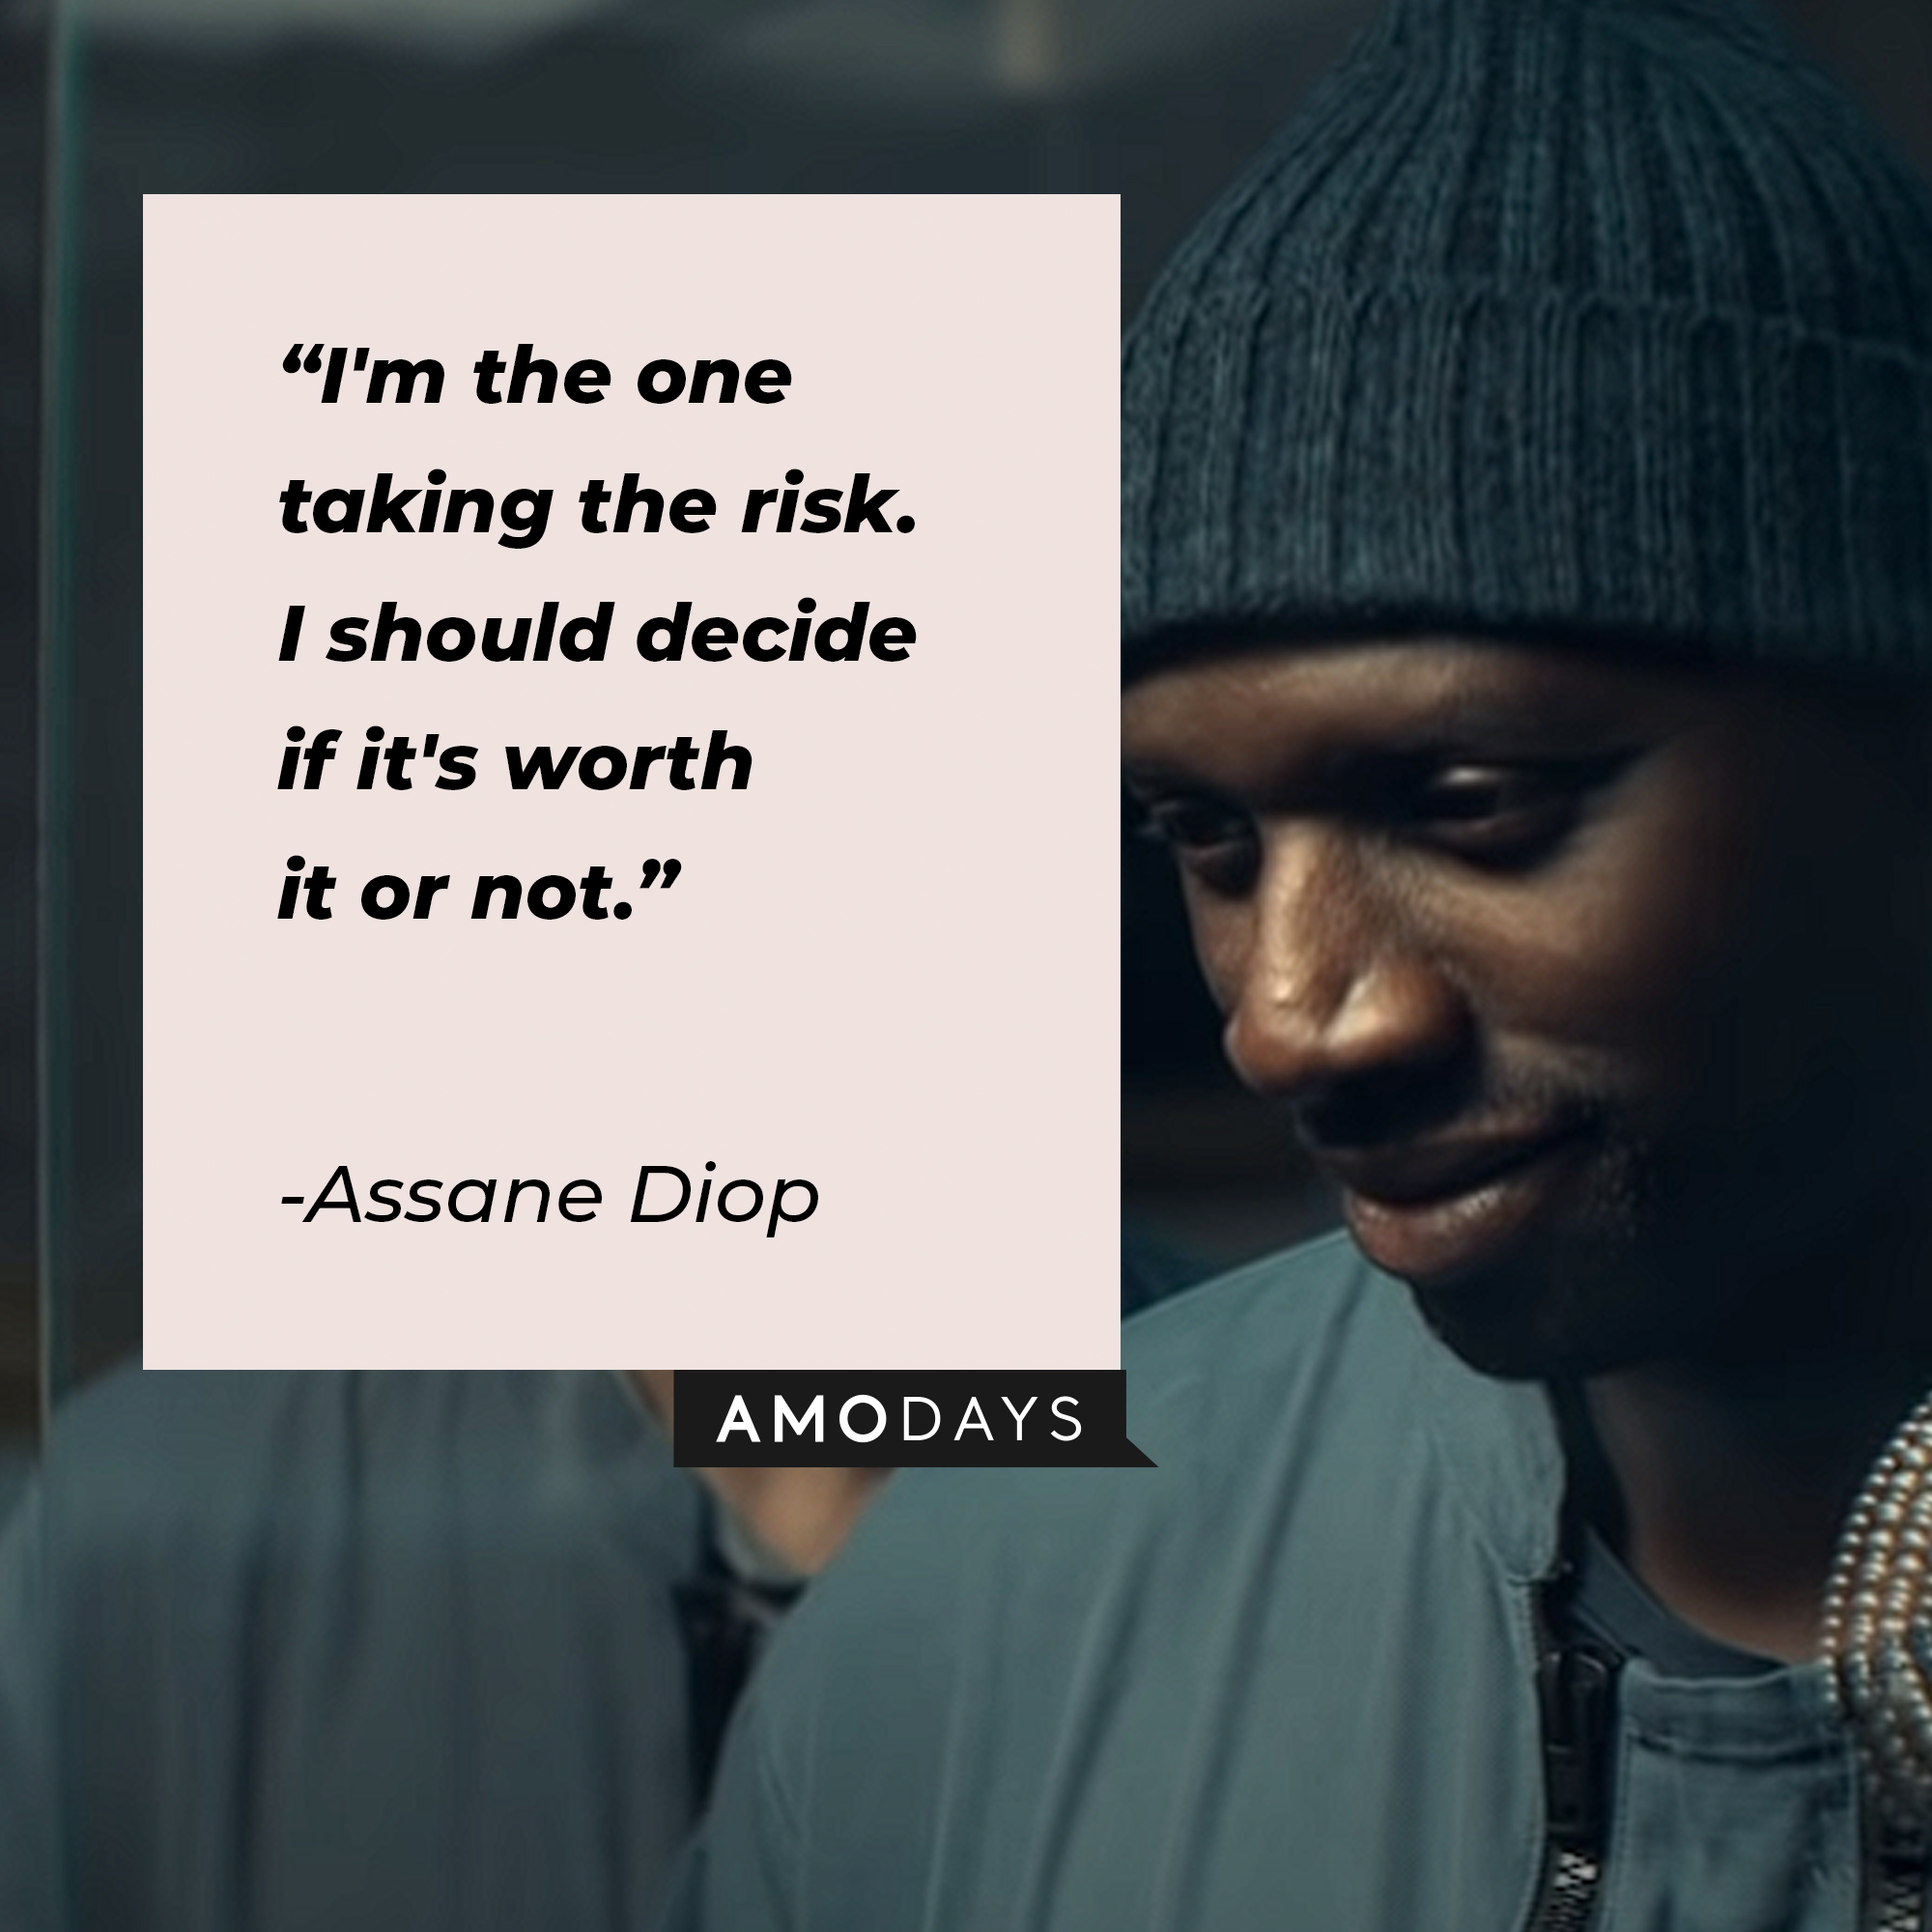 Assane Diop's quote: "I'm the one taking the risk. I should decide if it's worth it or not." | Image: Amodays